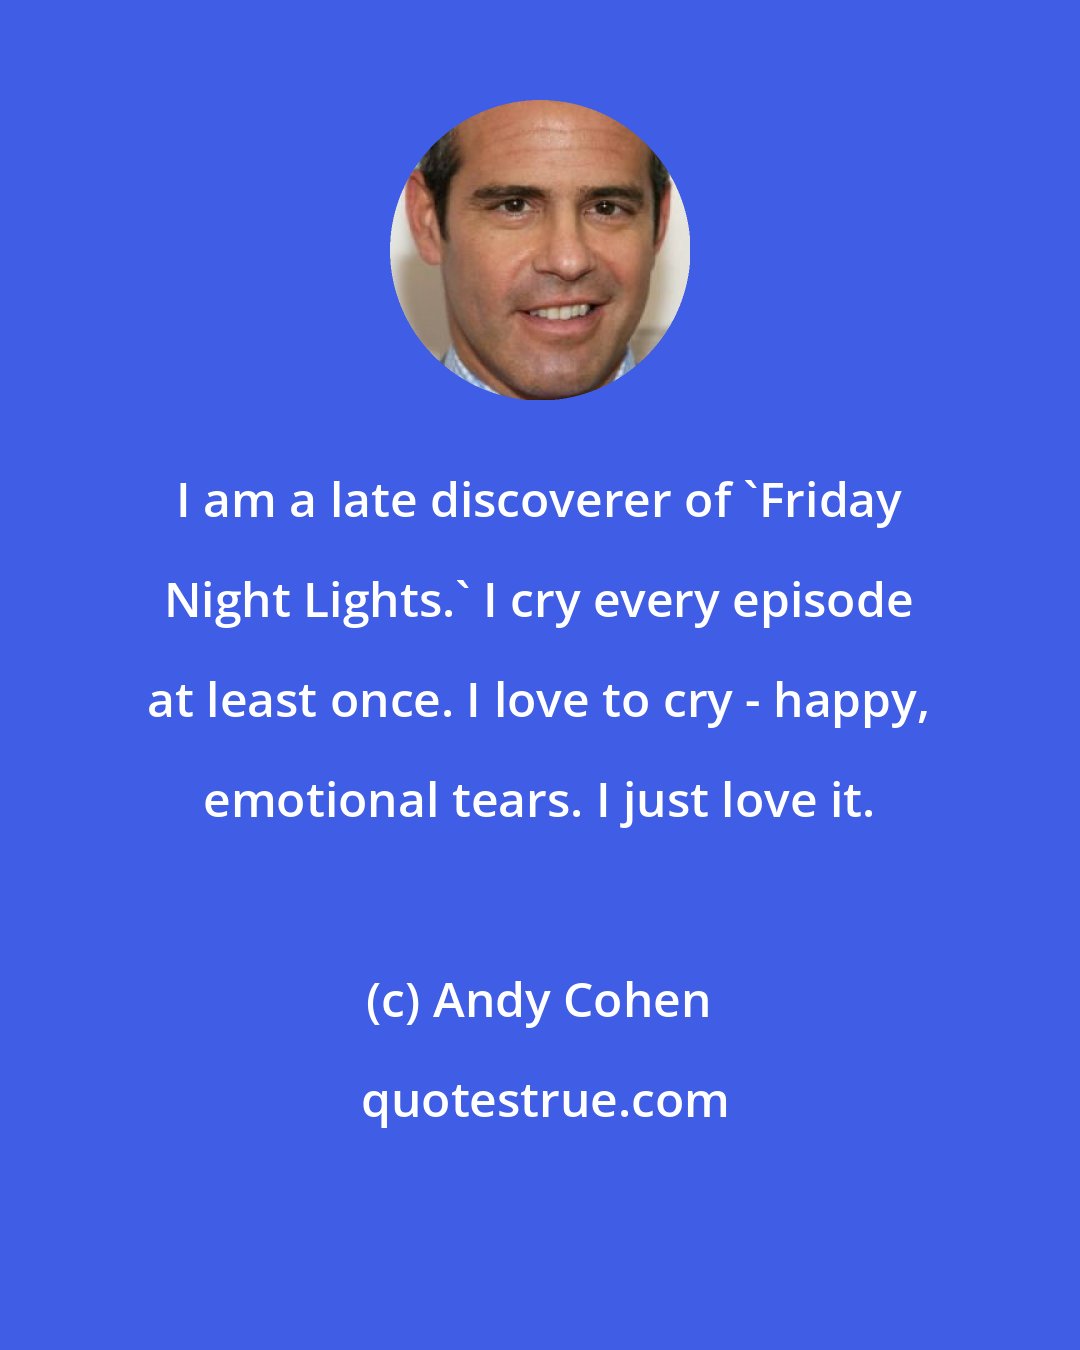 Andy Cohen: I am a late discoverer of 'Friday Night Lights.' I cry every episode at least once. I love to cry - happy, emotional tears. I just love it.